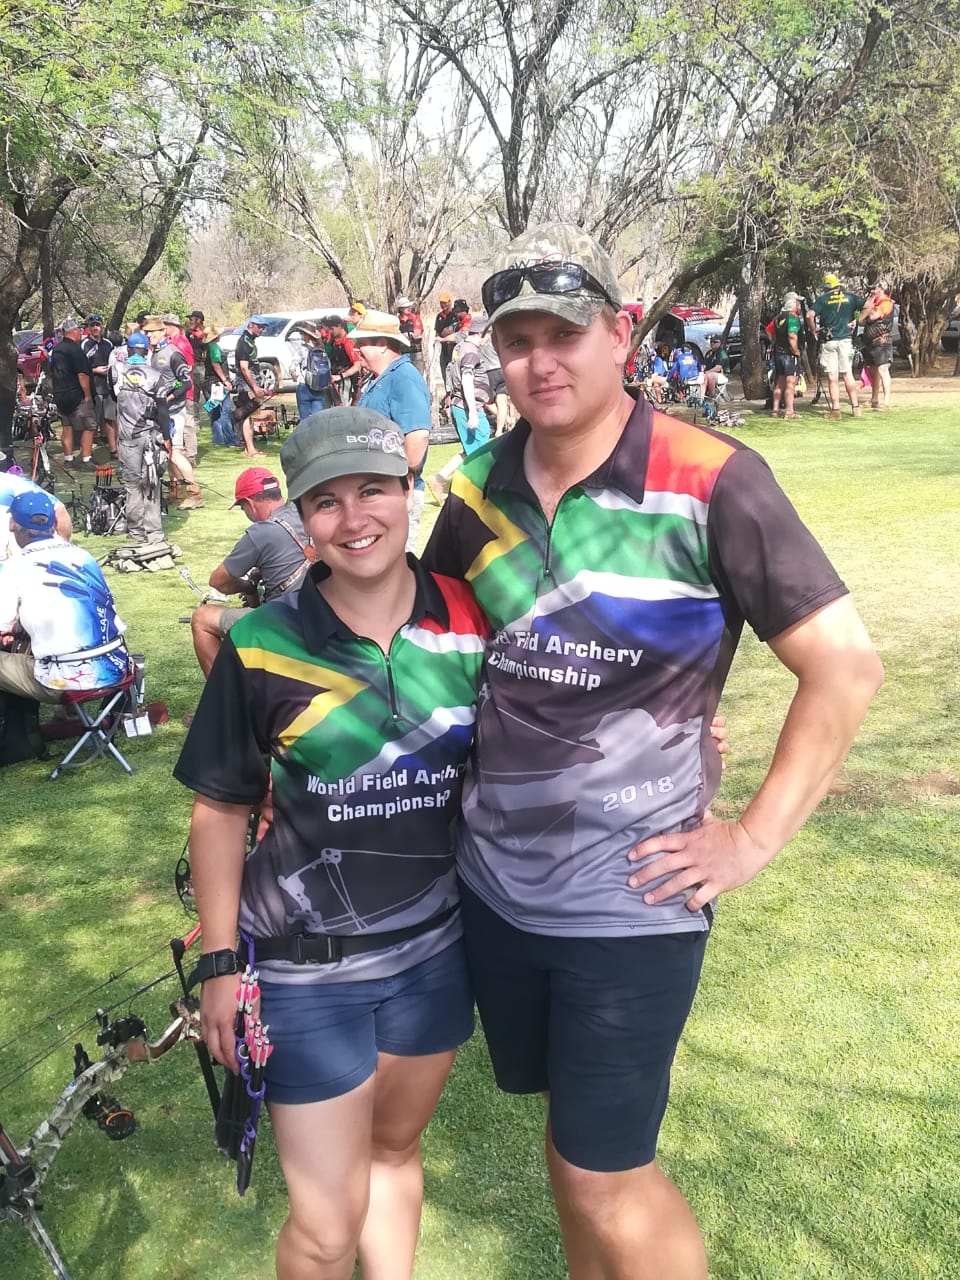 Polygraph examiners representing South Africa at the World Field Archery Championships 2018